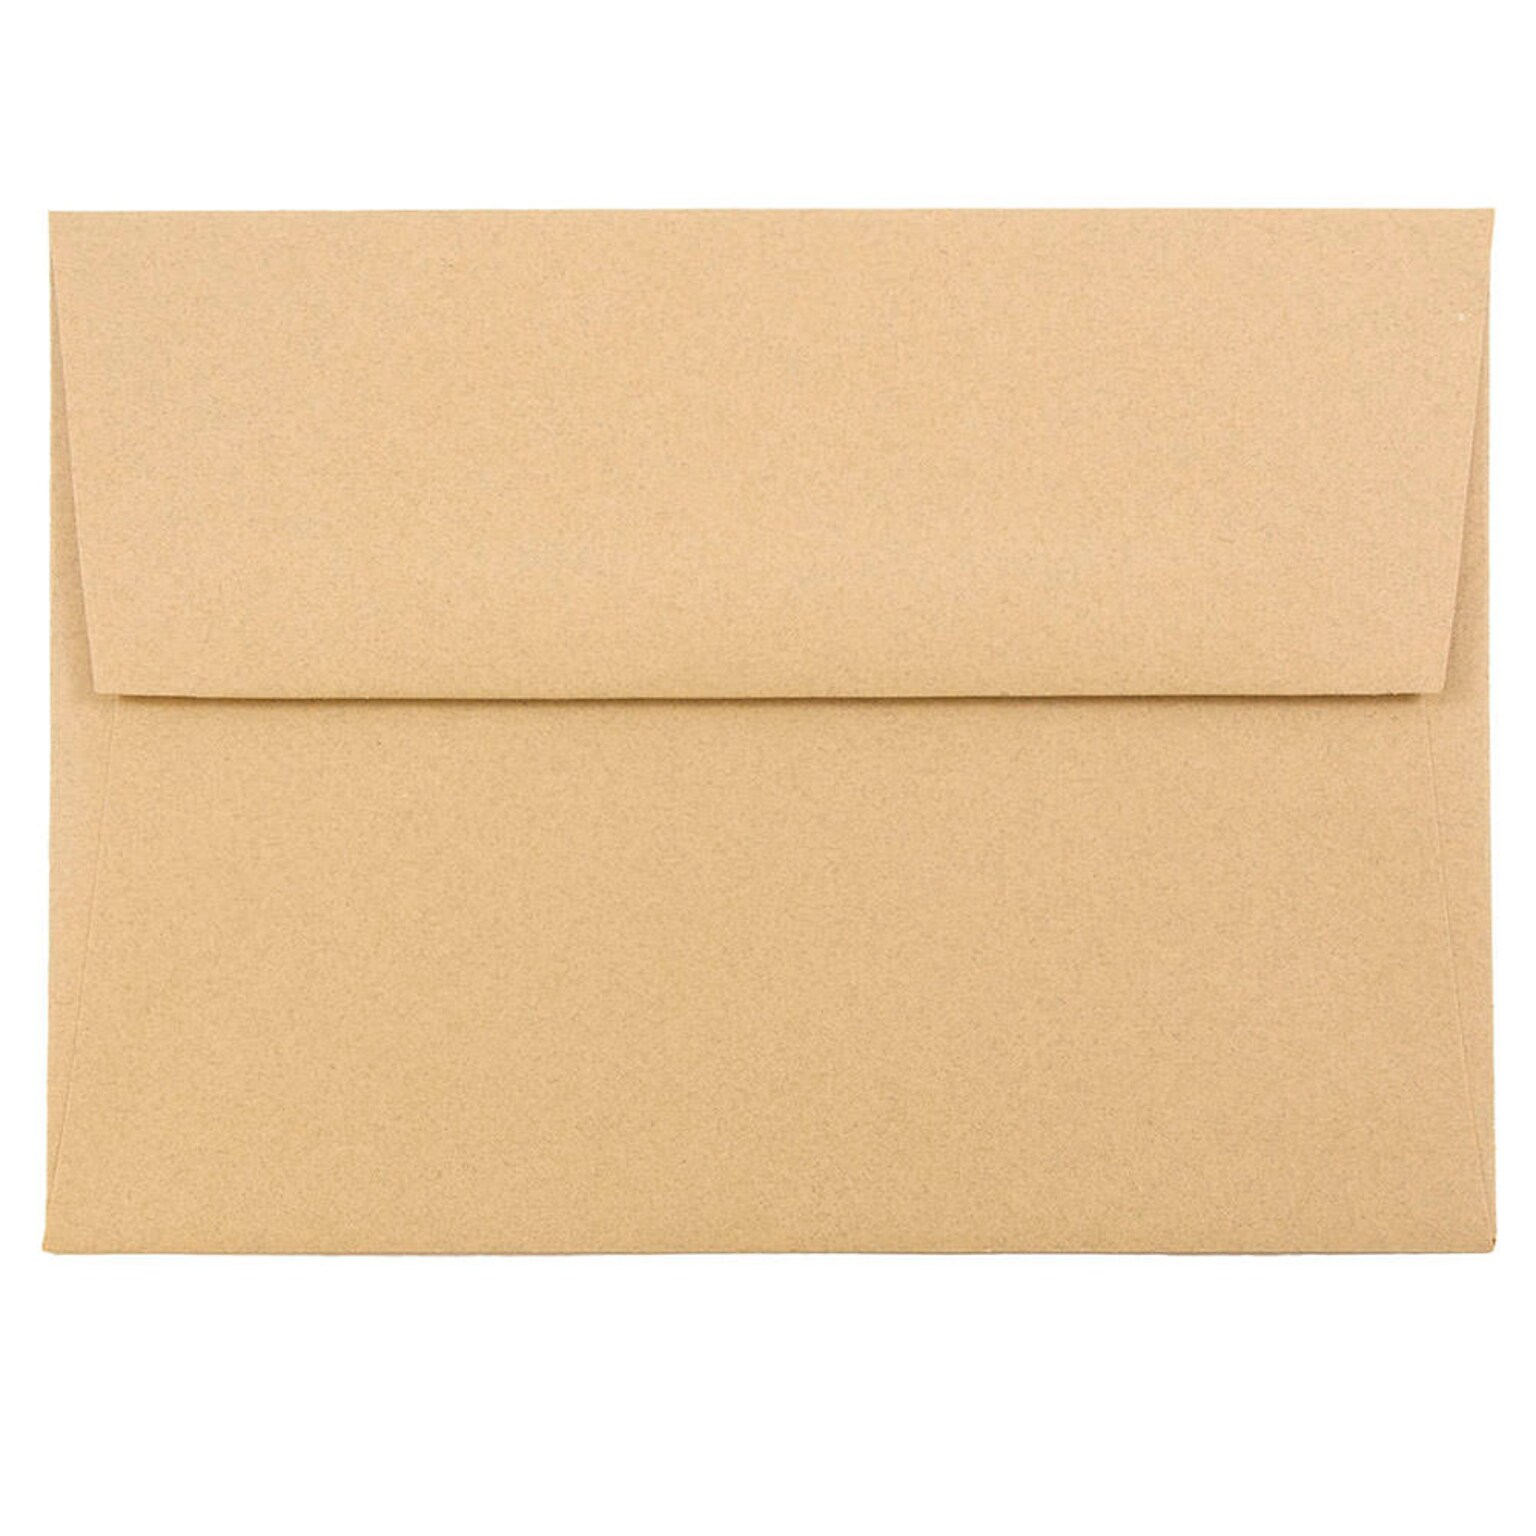 JAM Paper® A6 Passport Invitation Envelopes, 4.75 x 6.5, Ginger Brown Recycled, 25/Pack (11179)